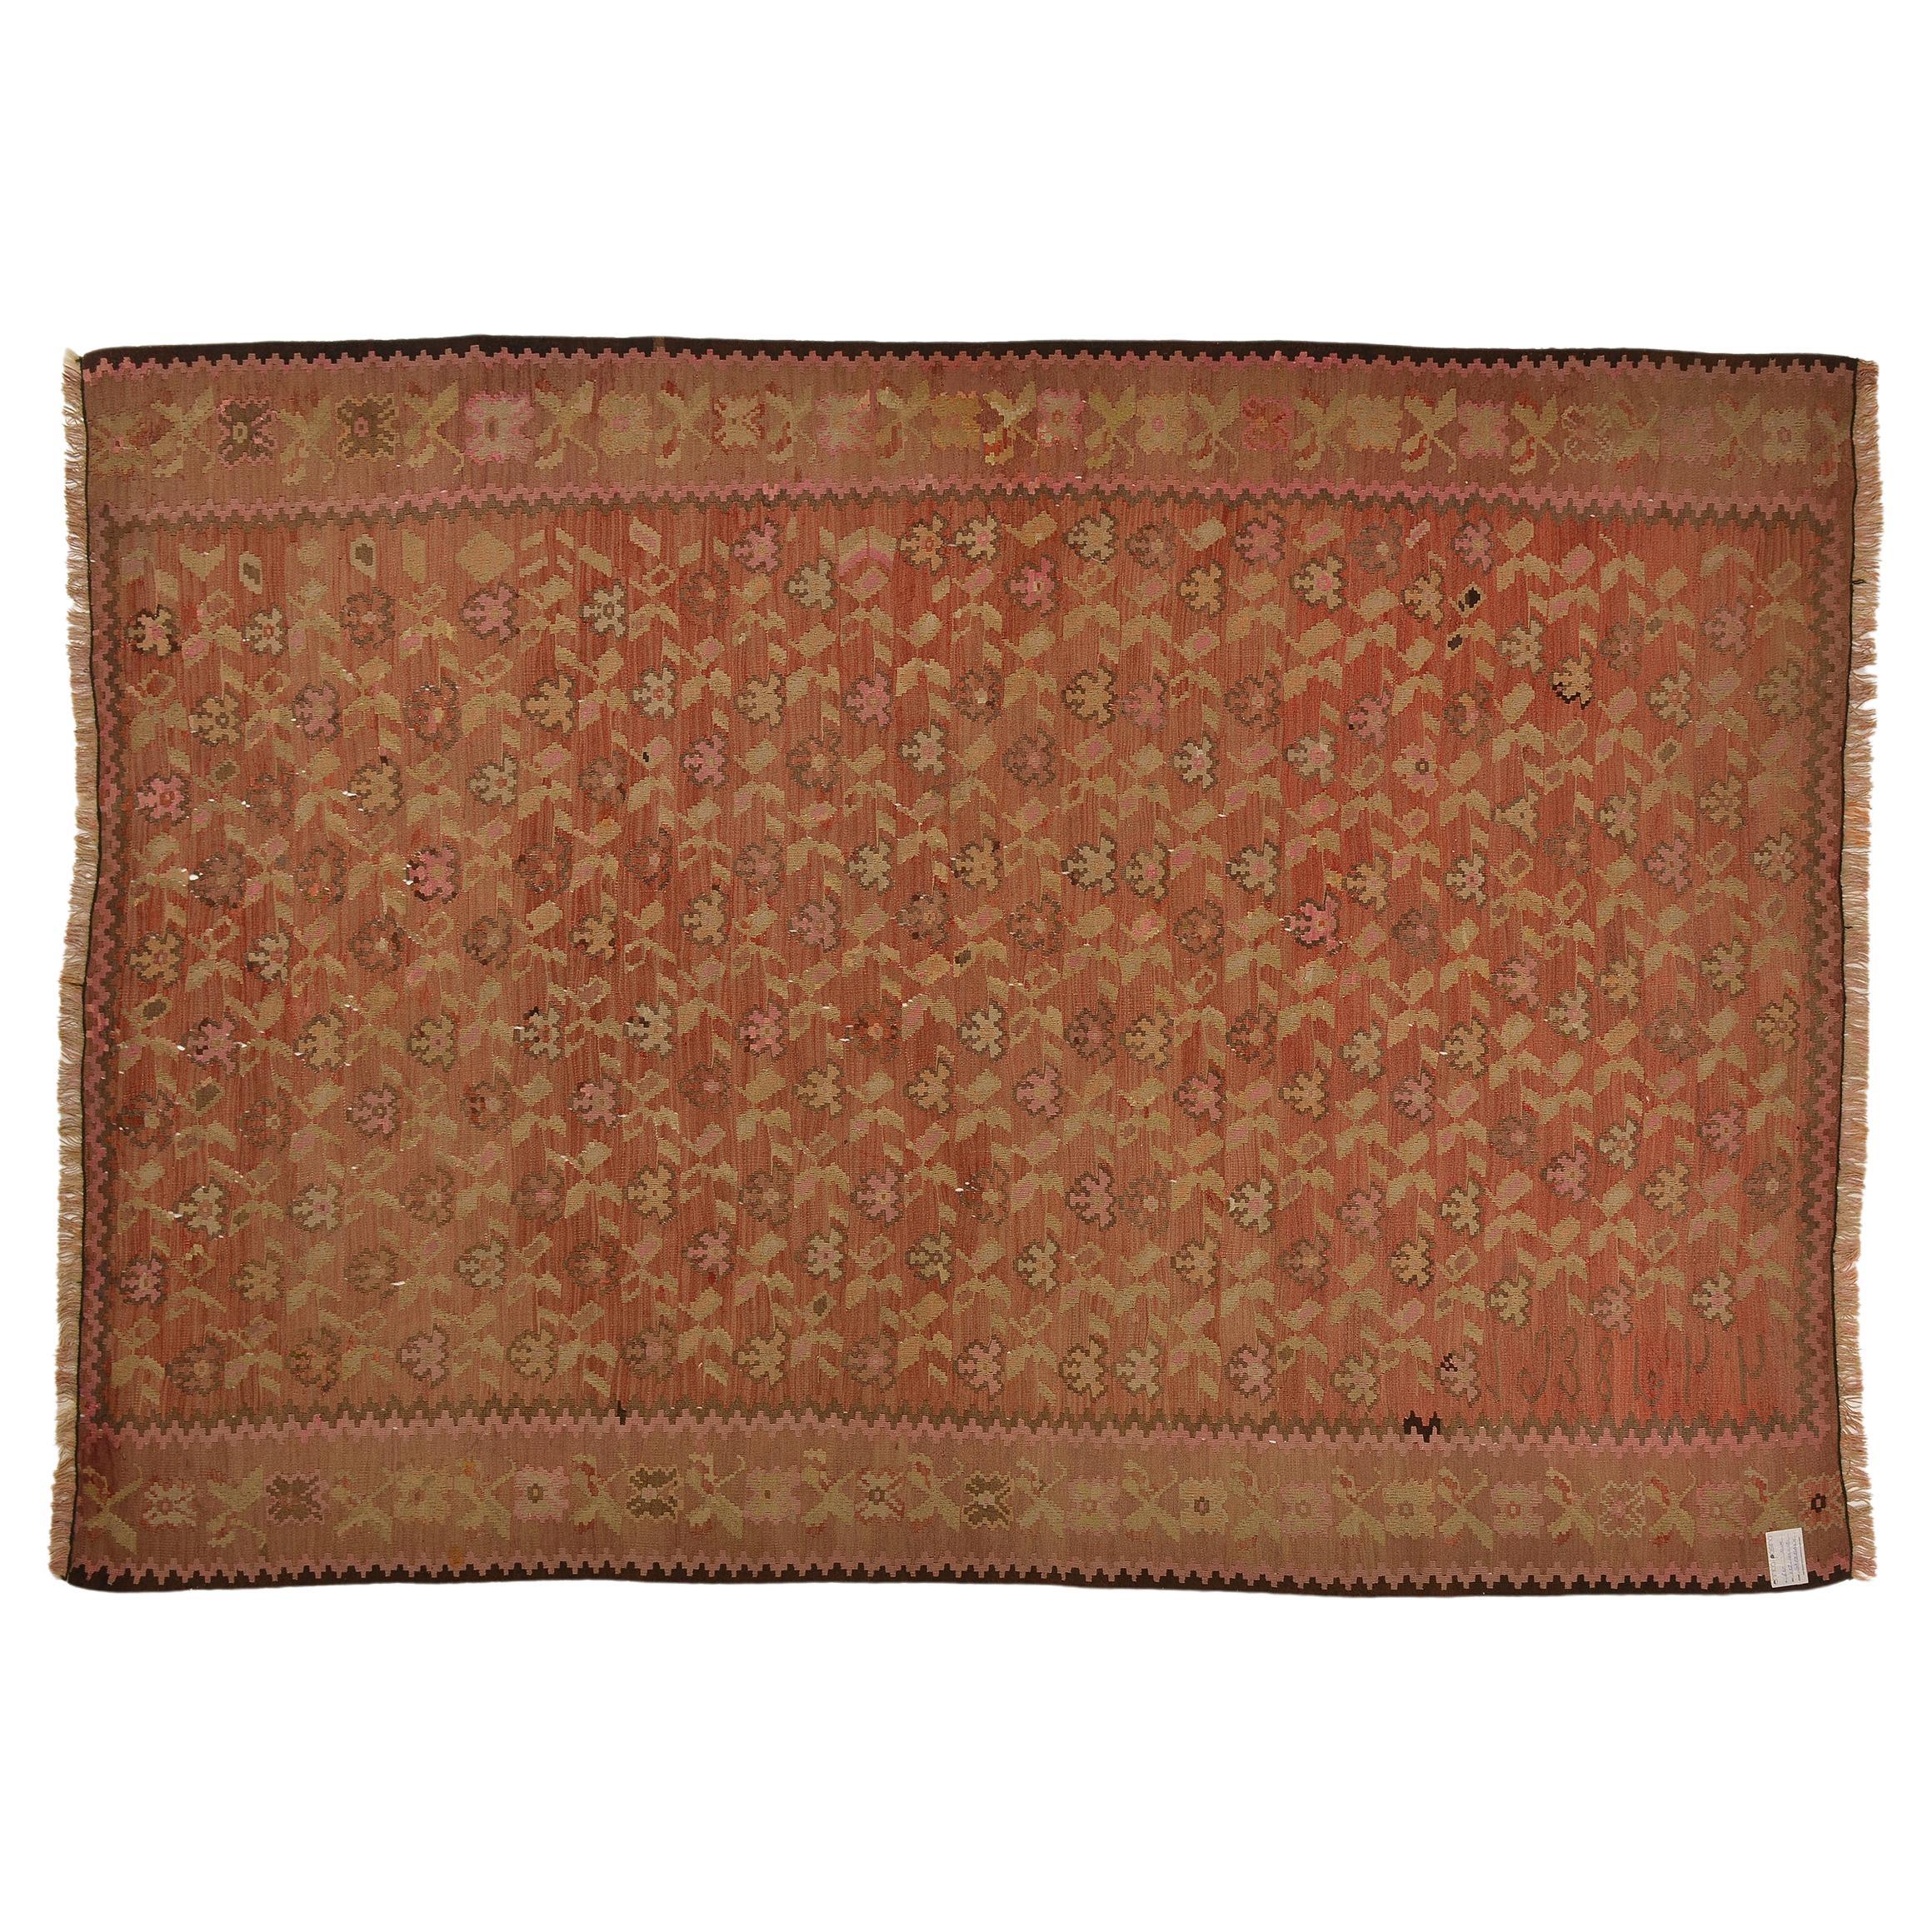 nr. 620 - Old Caucasian Garabagh kilim, signed and dated 1938.  Very fine workmanship, but reduced frames on the two headers, therefore convenient reduced price. It can also be placed on a sofa: elegant and resistant.